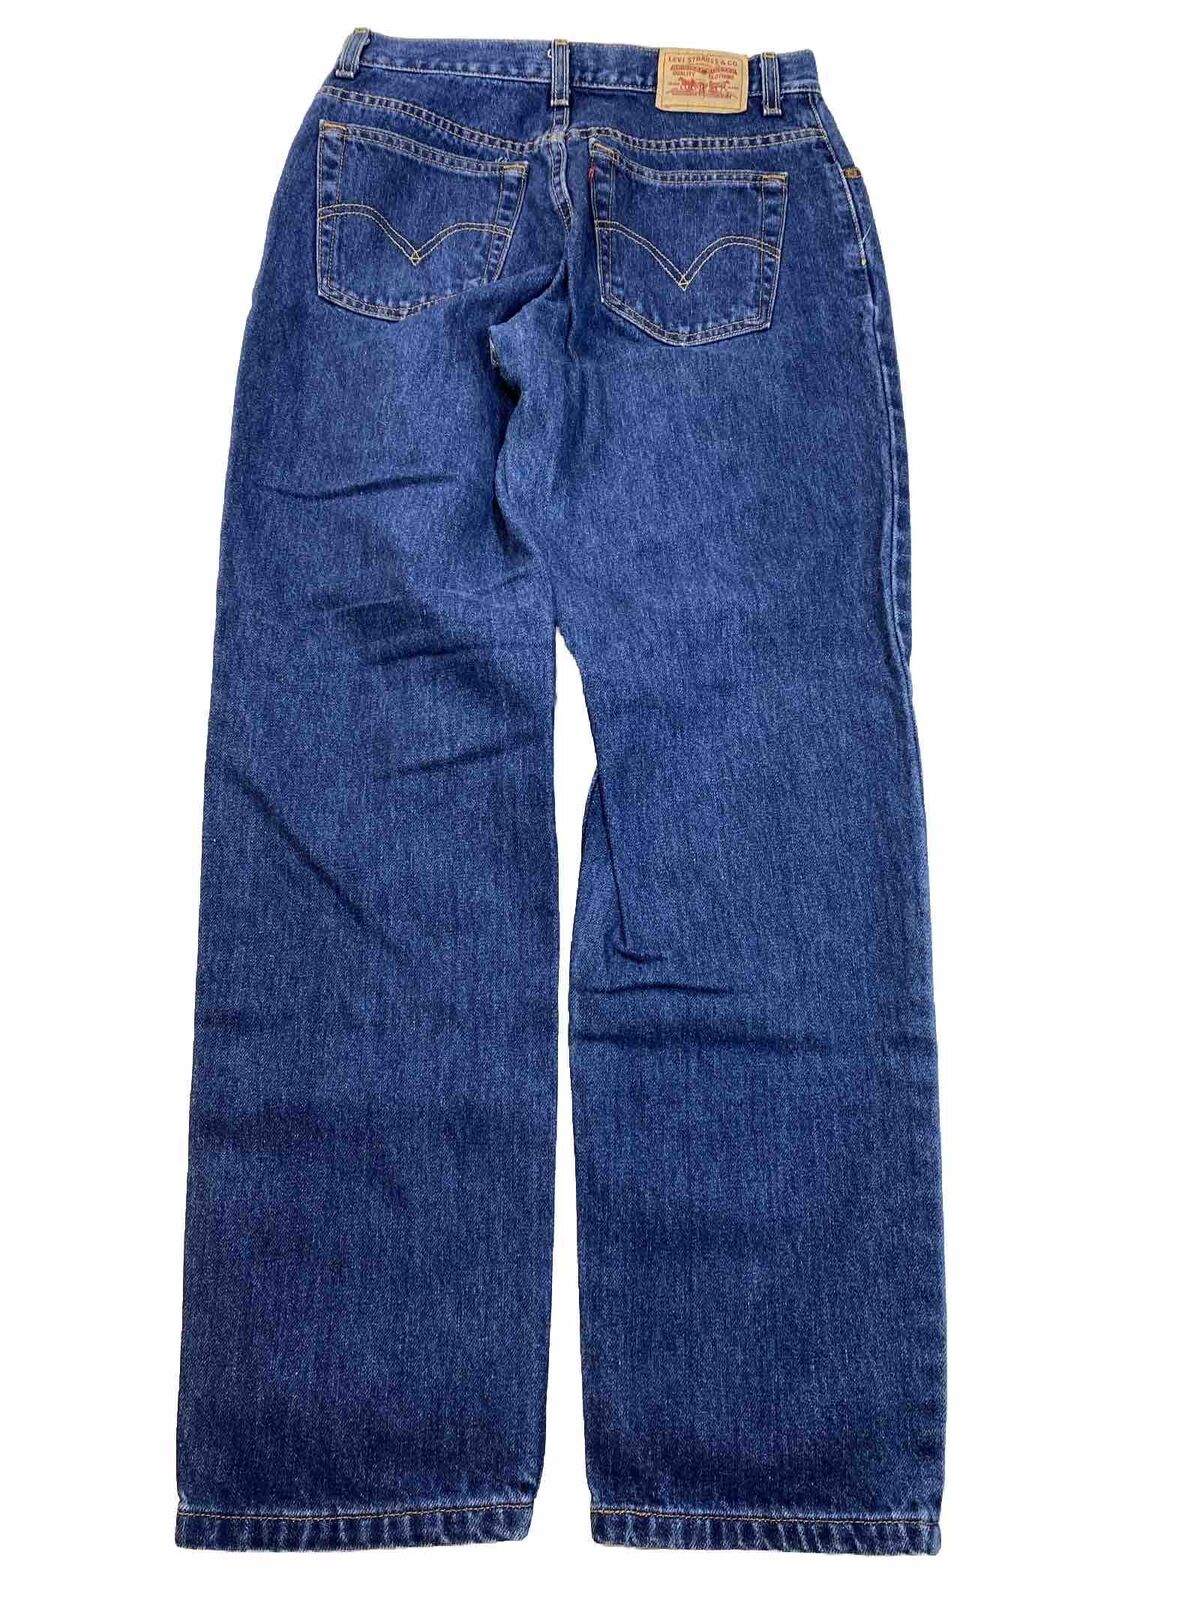 Levi's Women's Dark Wash 550 Relaxed Tapered Jeans - 10 M